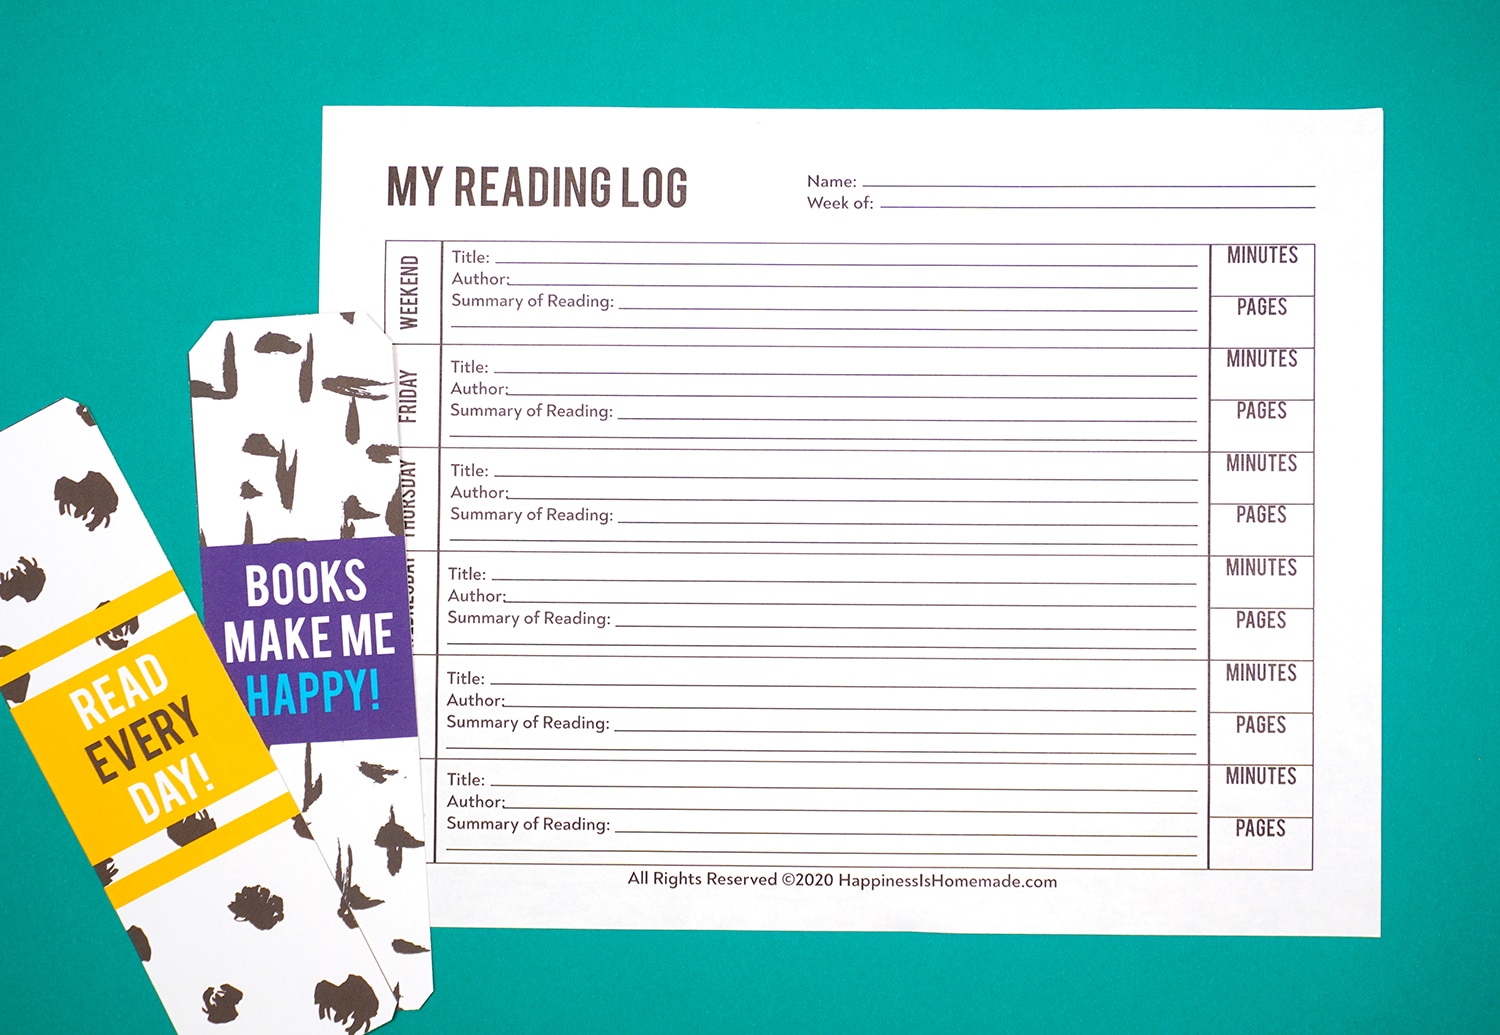 Printable reading log with bookmarks on teal background